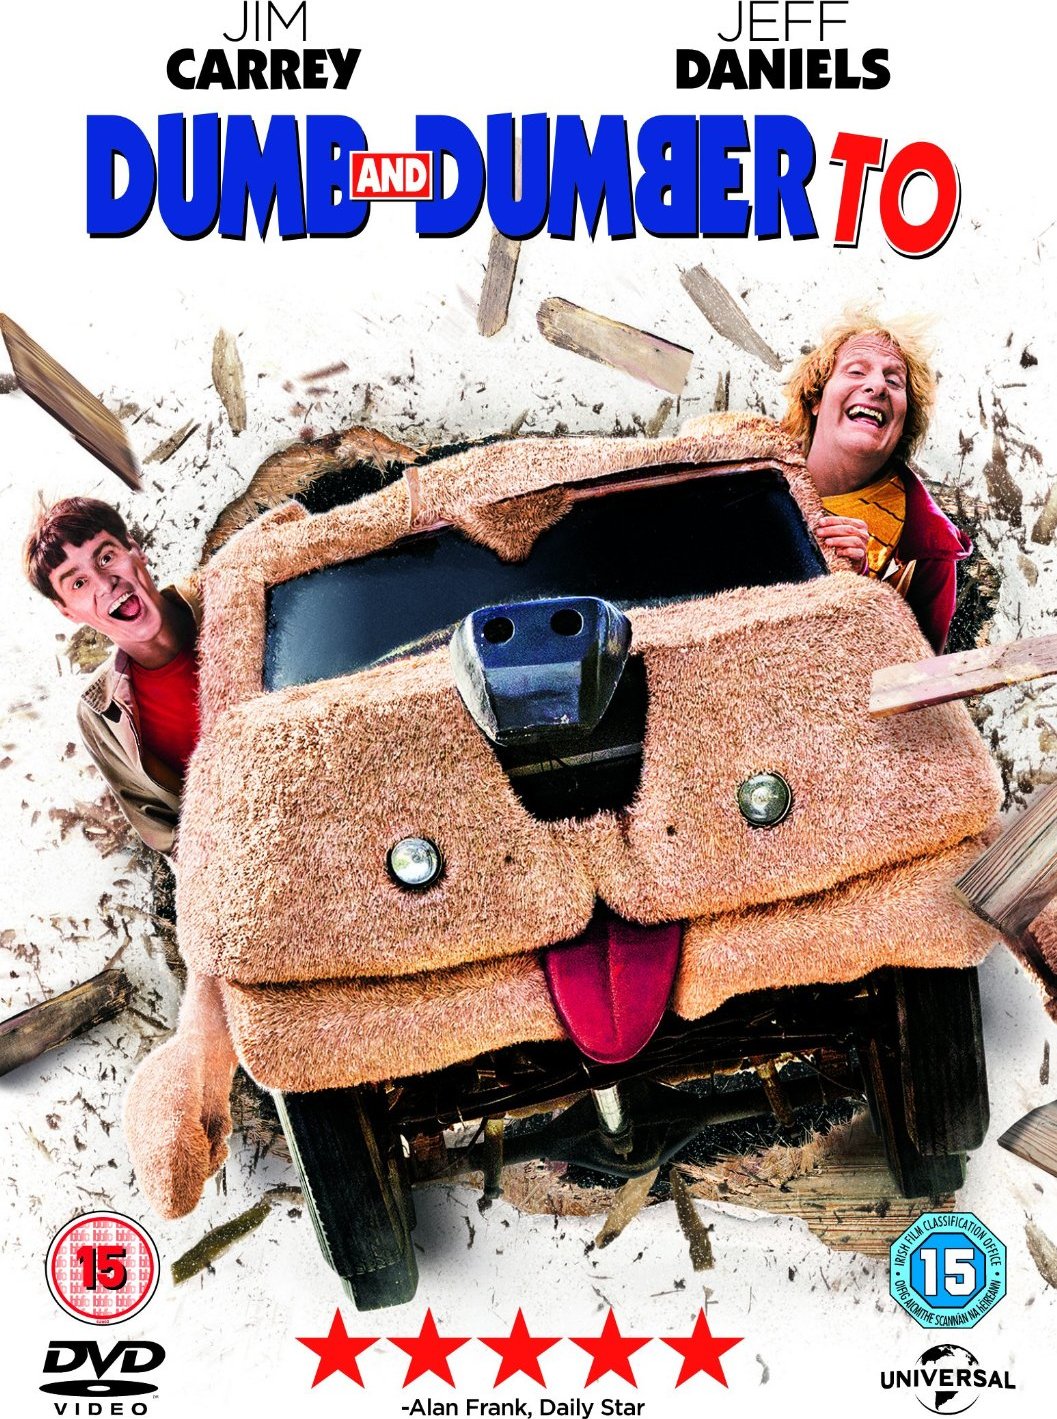 Dumb and Dumber: 3-Film Collection (1994-2014) [Theatrical and Unrated Versions] Una Pareja de Idiotas: Colección de 3 Películas (1994-2014) [Theatrical and Unrated Versions] [E-AC3/AC3 5.1/2.0 + SRT] [Prime Video] [HBO Max] [ClaroVideo] 107307_front